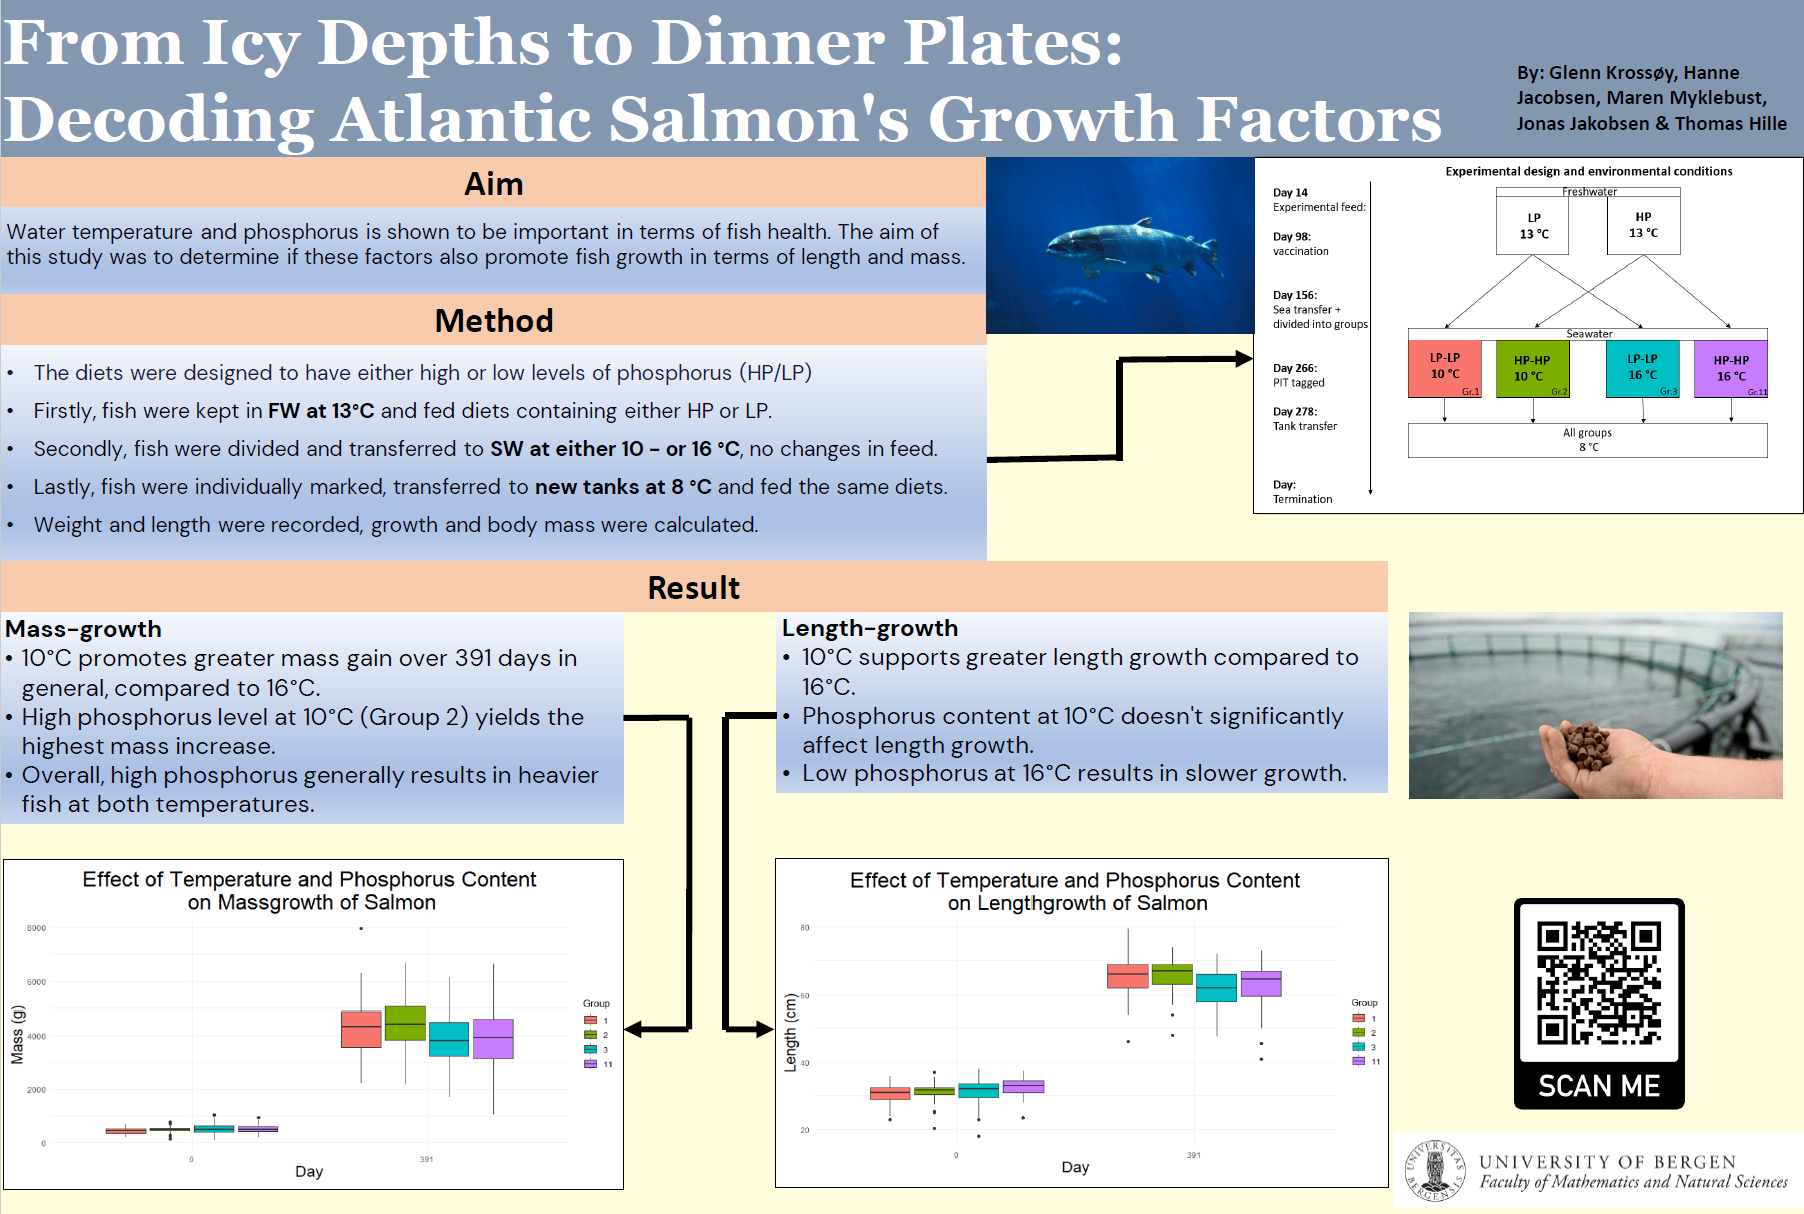 From Icy Depths to Dinner Plates: Decoding Atlantic Salmon's Growth Factors